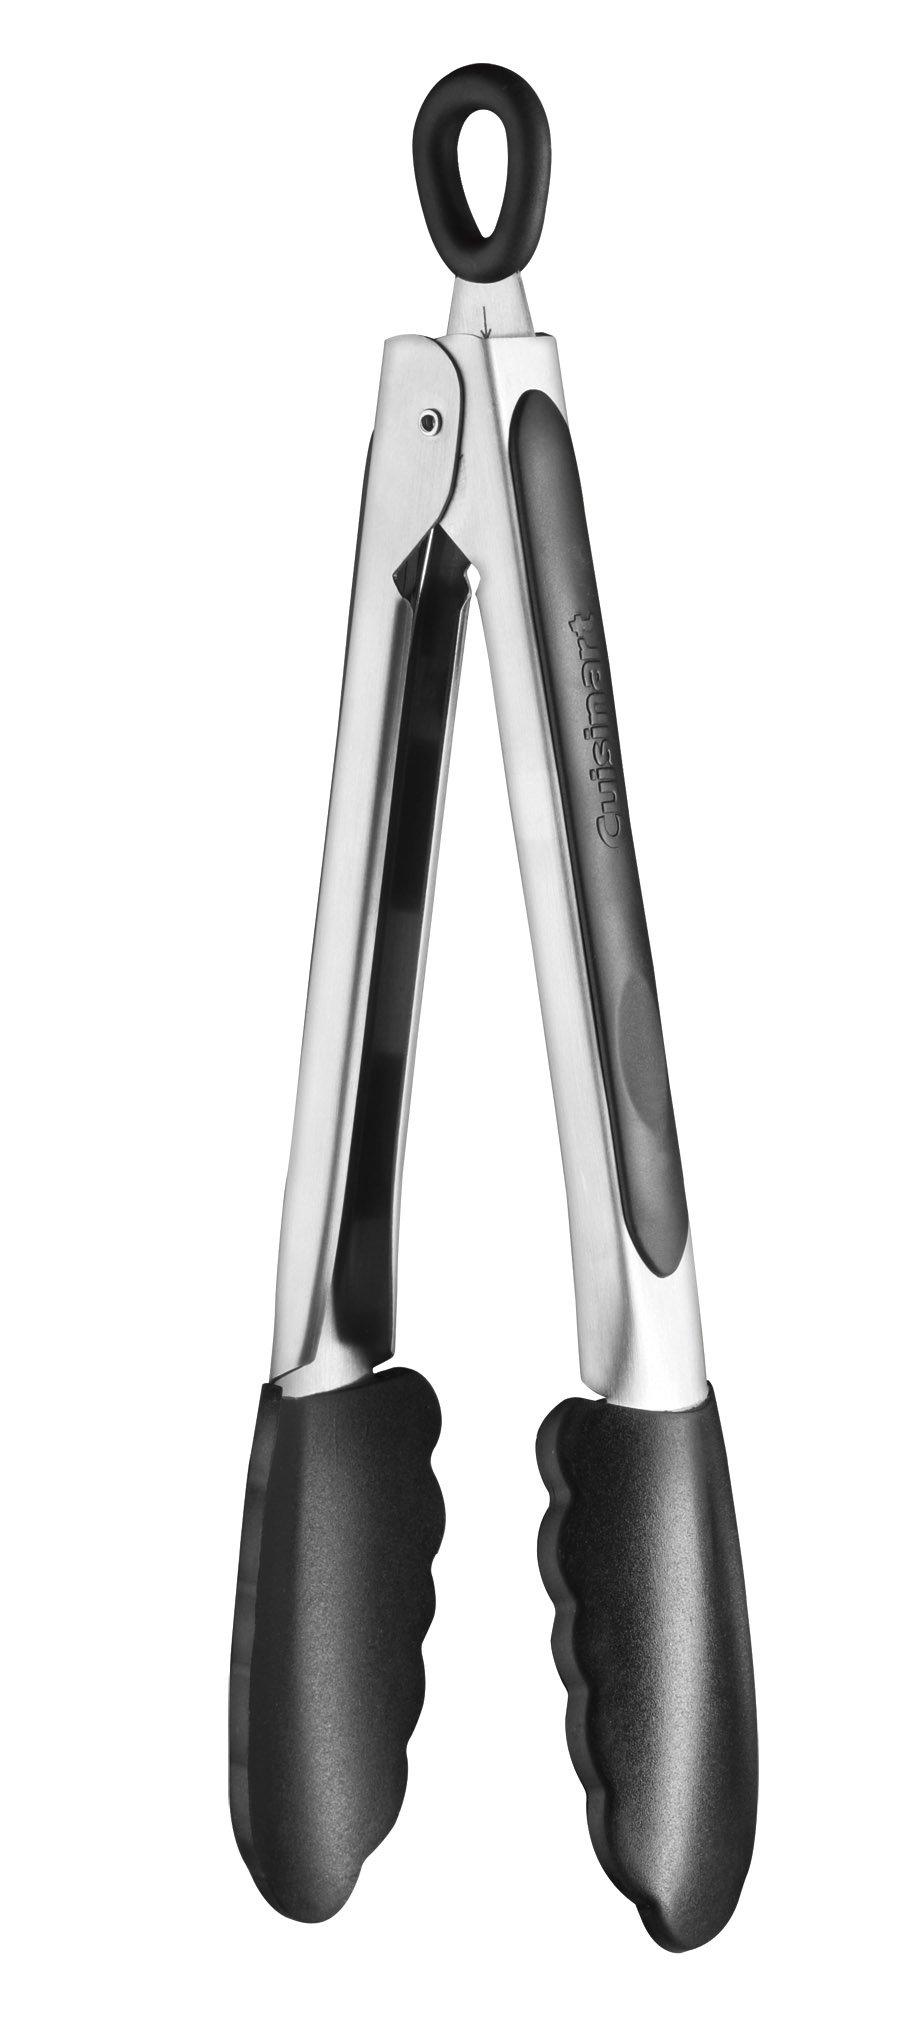 9" Cuisinart Stainless Steel Silicone-Tipped Kitchen Tongs (Black) $5.09 + Free Shipping w/ Walmart + or on orders $35+